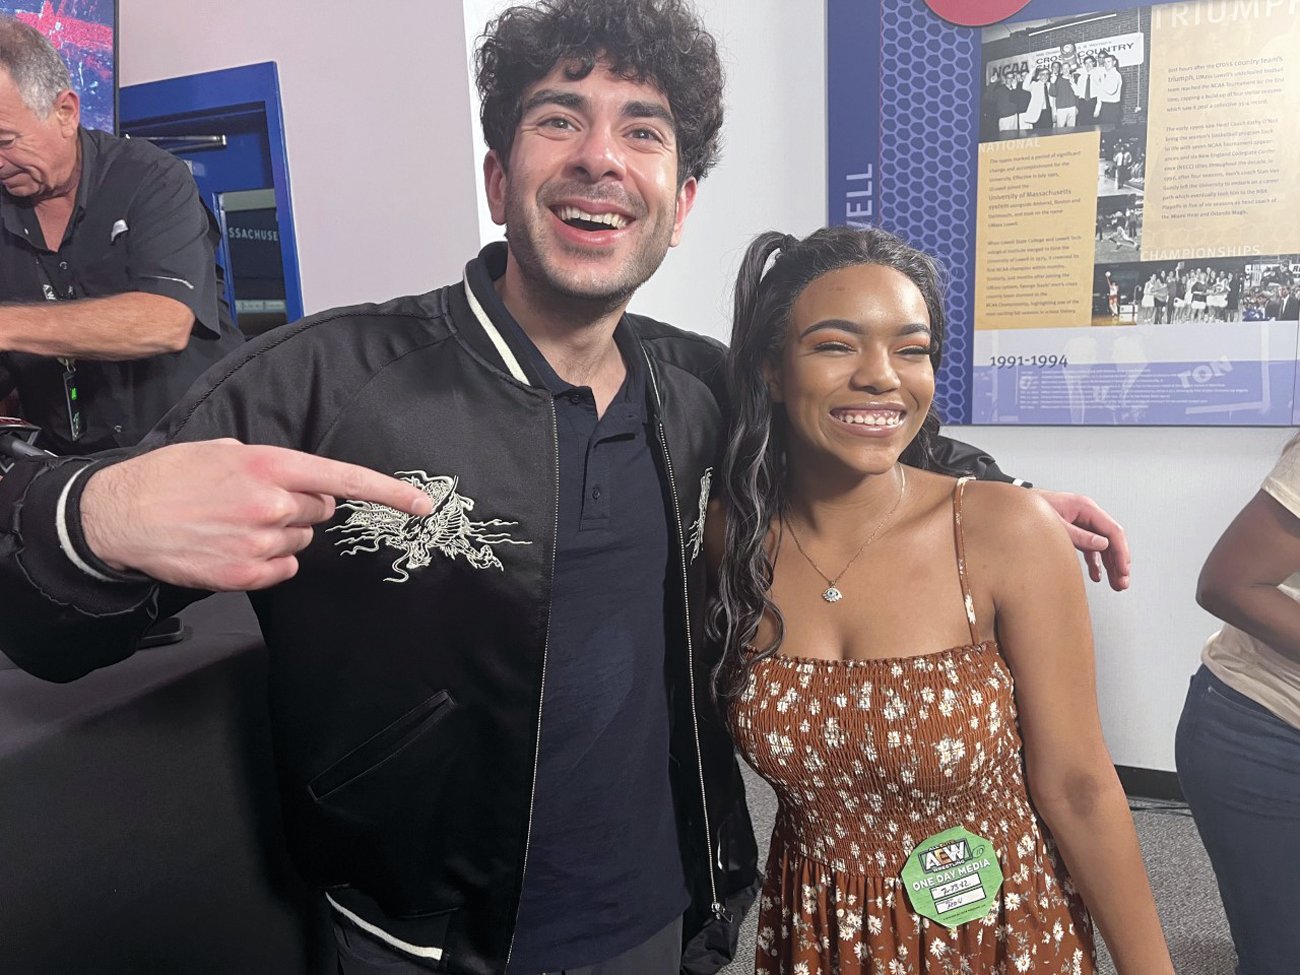 SHE’S THE ONE:  Tony Khan, owner of AEW knows exactly who Jaychele Nicole Schenck is.